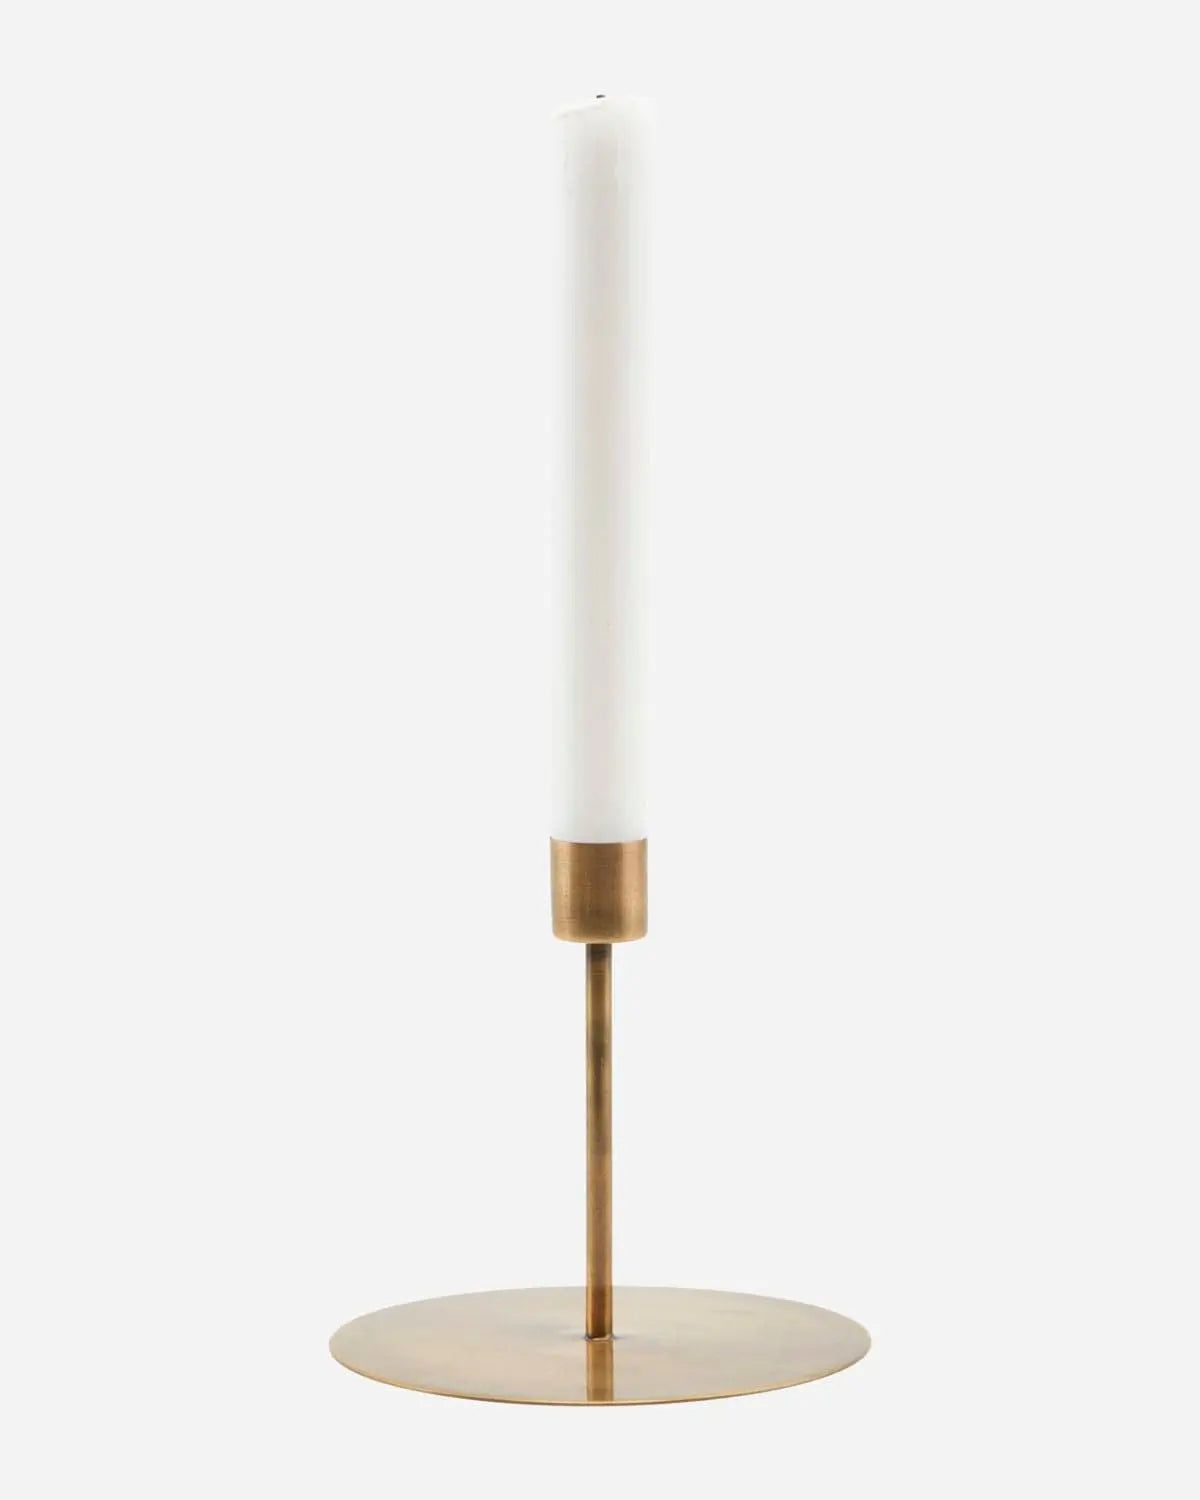 Candle Holders Anit, Antique brass Candle Holder - 5.12" - | Pop of Modern